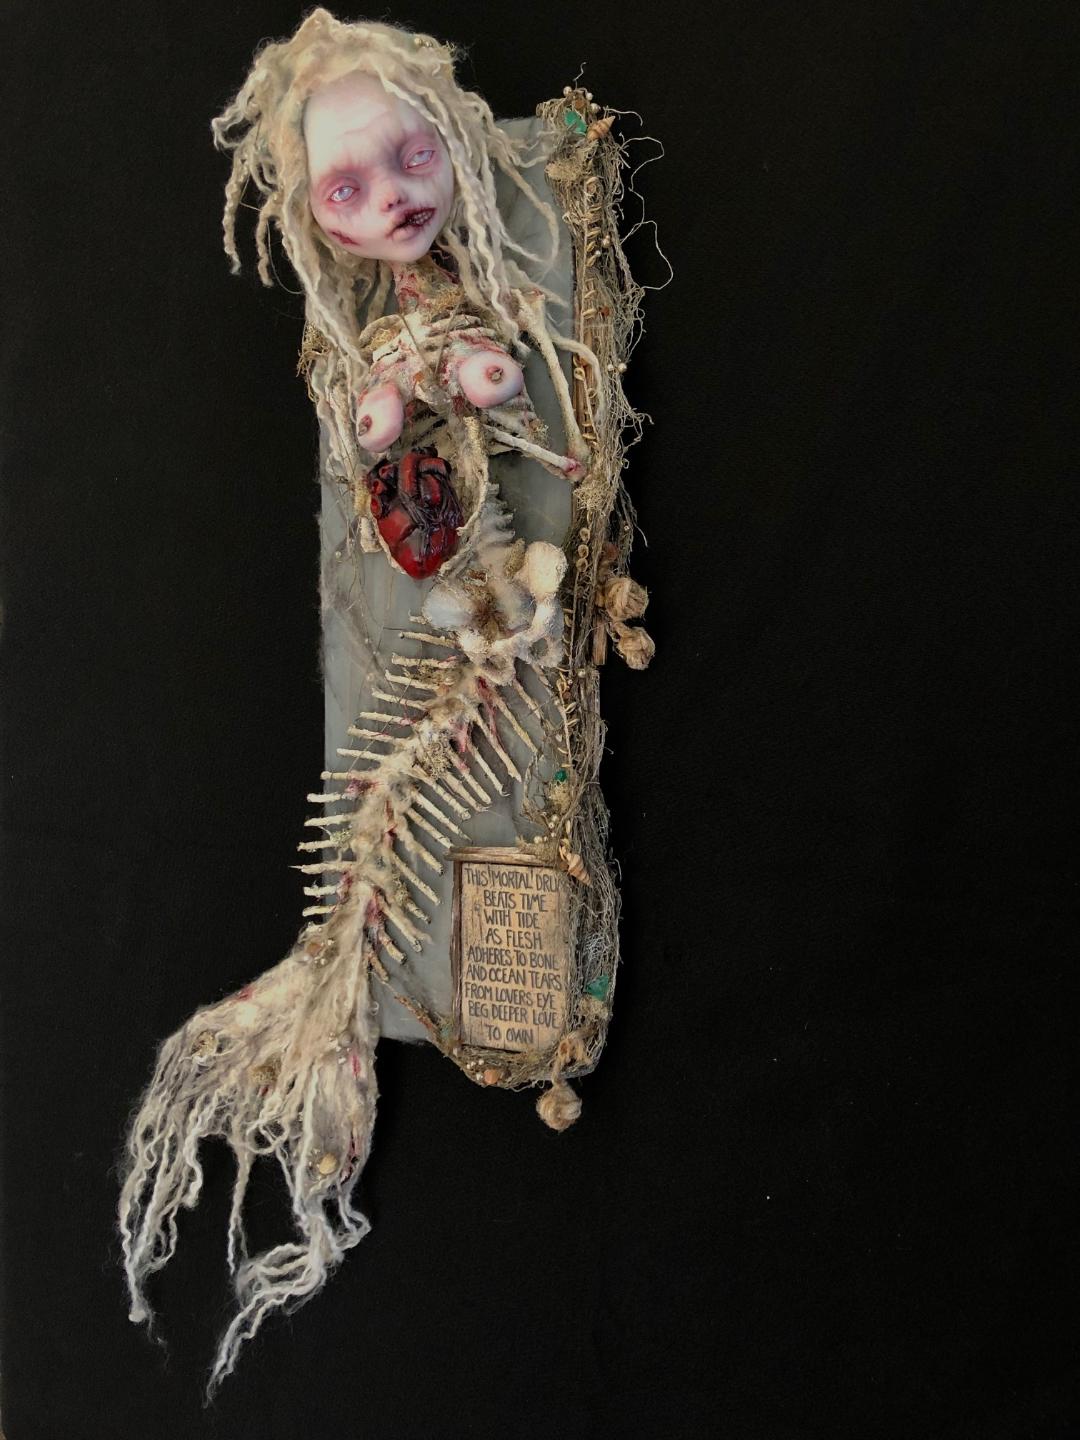 mixed media assemblage of a ghostly skeletal mermaid holding a bleeding heart goth doll repaint